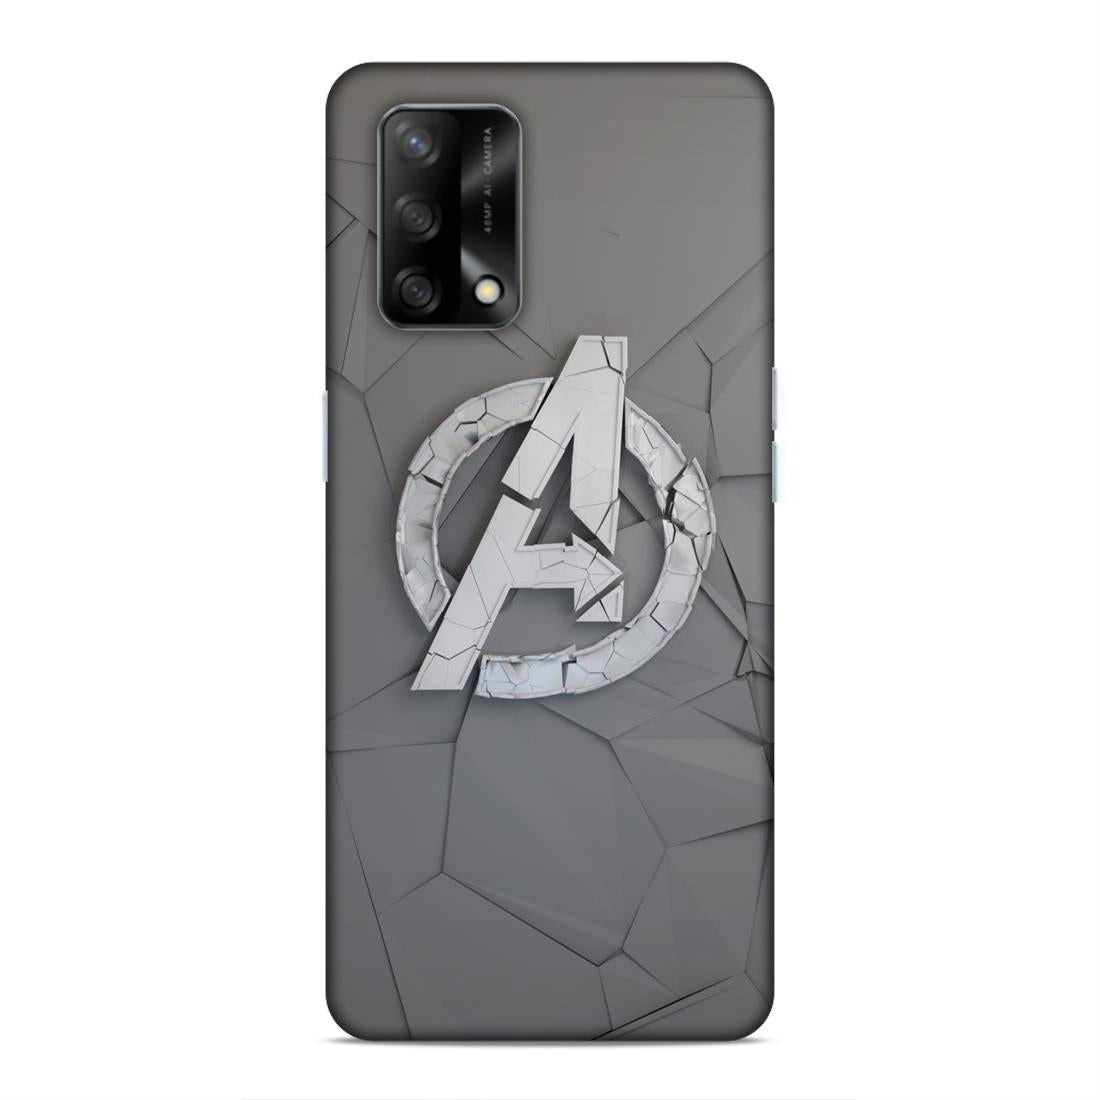 Avengers Symbol Hard Back Case For Oppo A74 5G / A54 5G / A93 5G - Right Marc